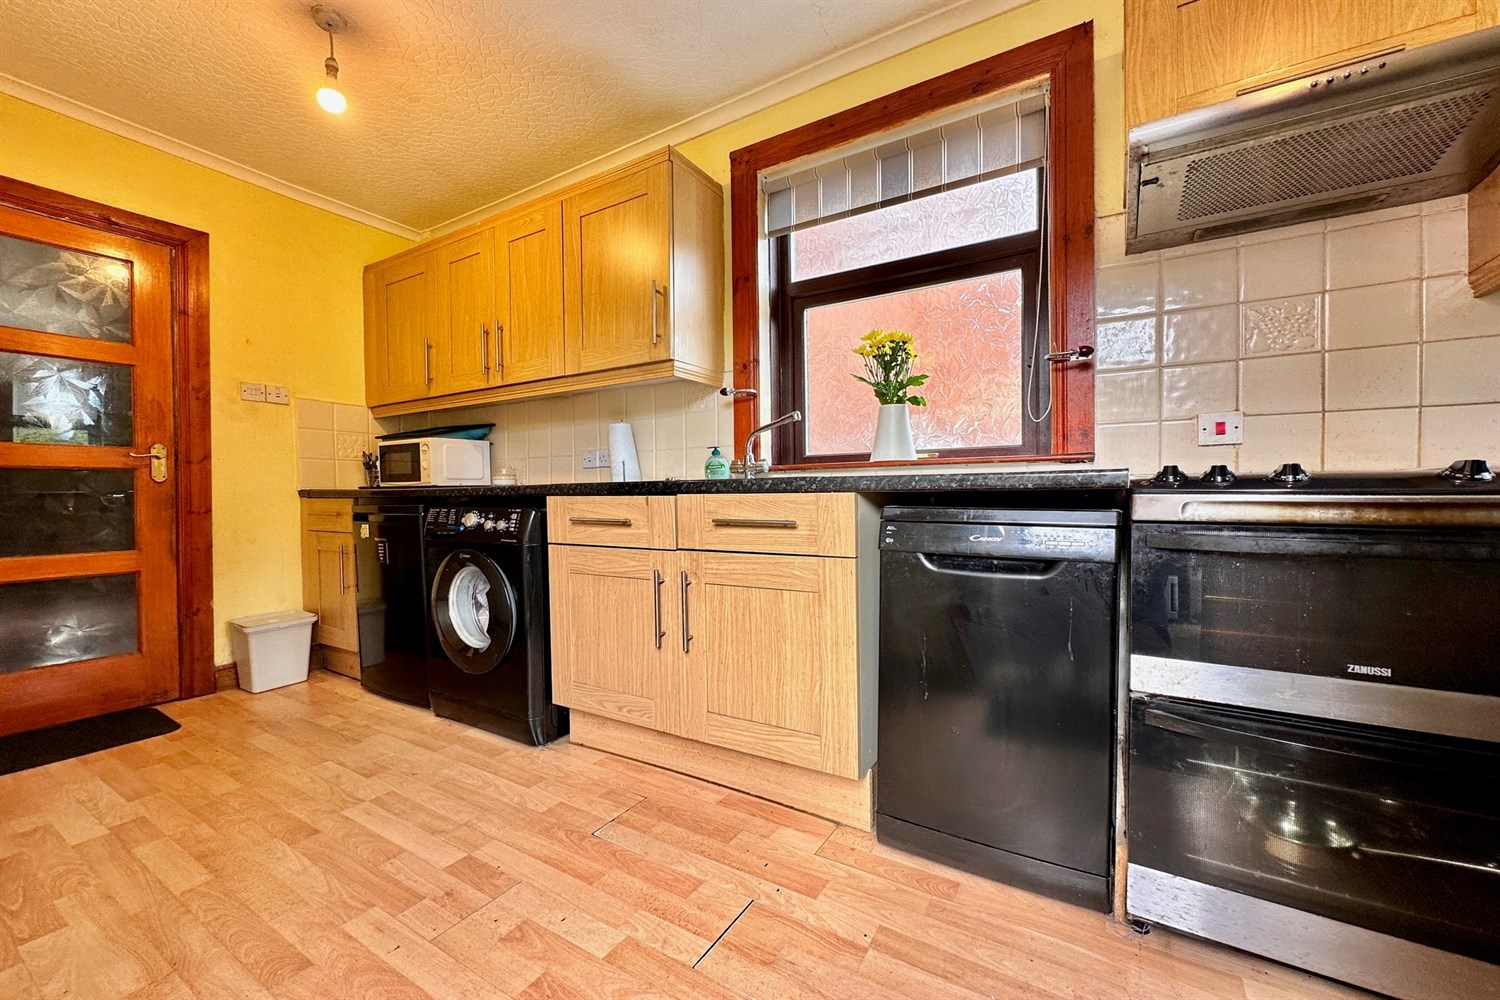 669 Oldpark Road, Belfast, BT14 6QY